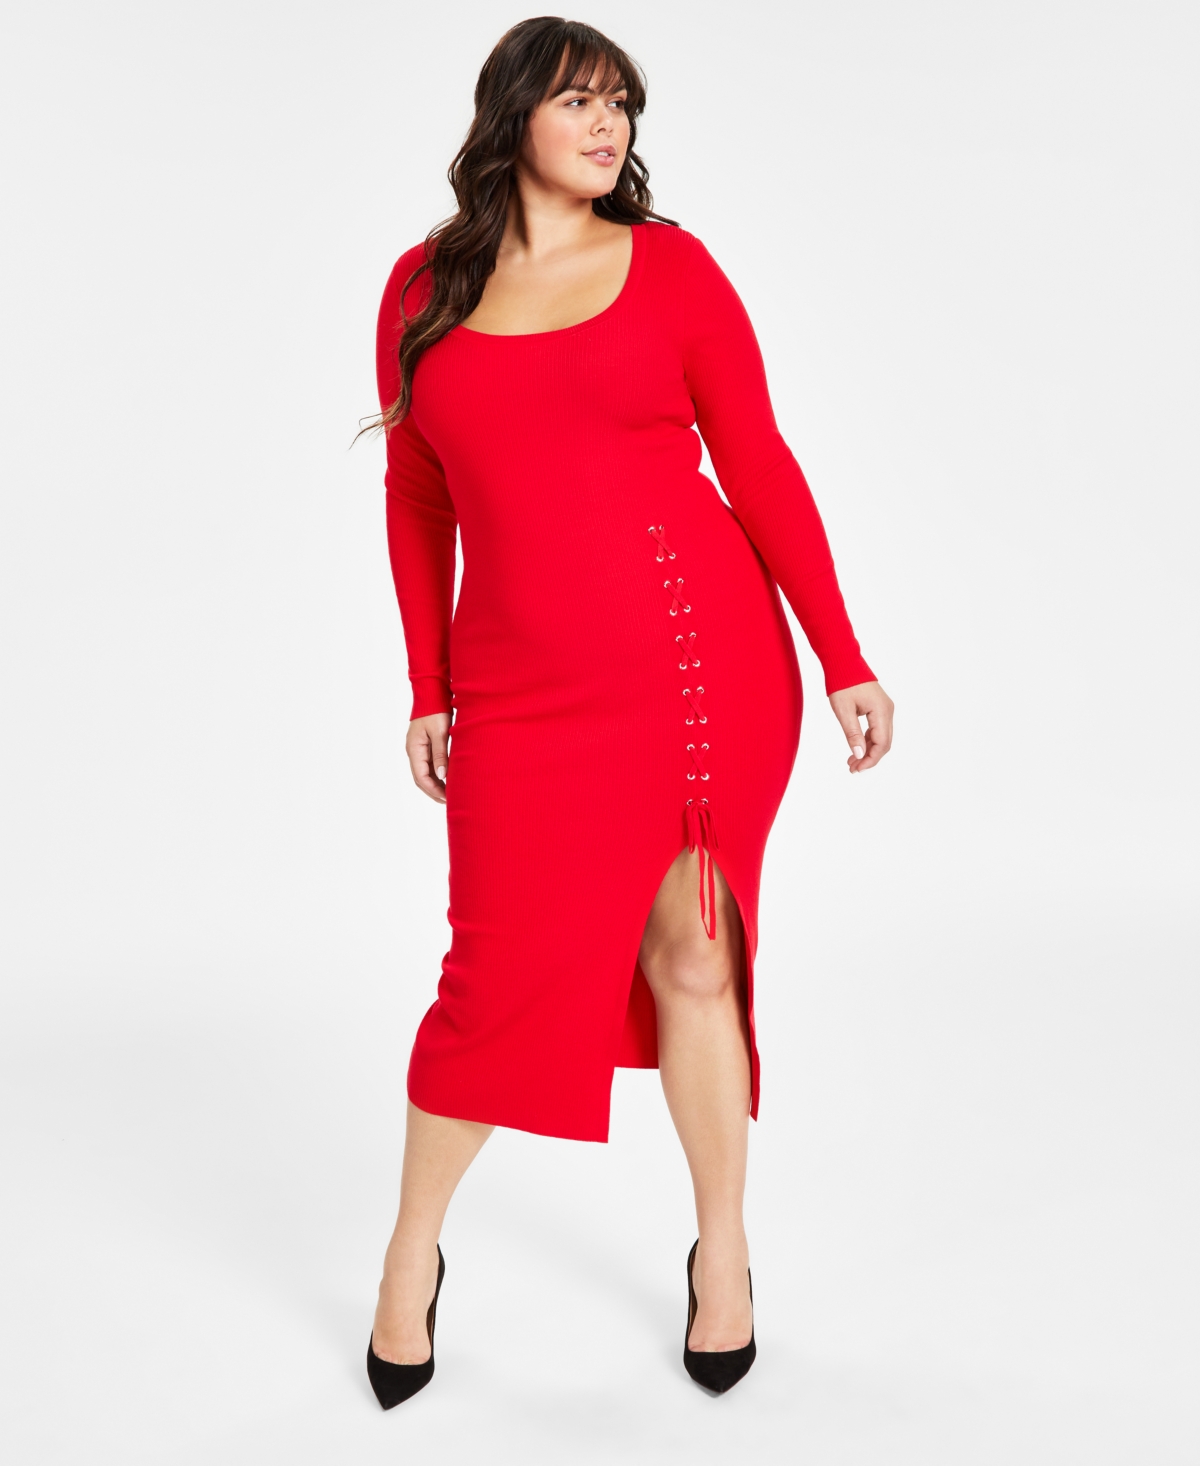 Bar Iii Plus Size Rib-knit Lace-up Sweater Dress, Created For Macy's In Cherry Candy